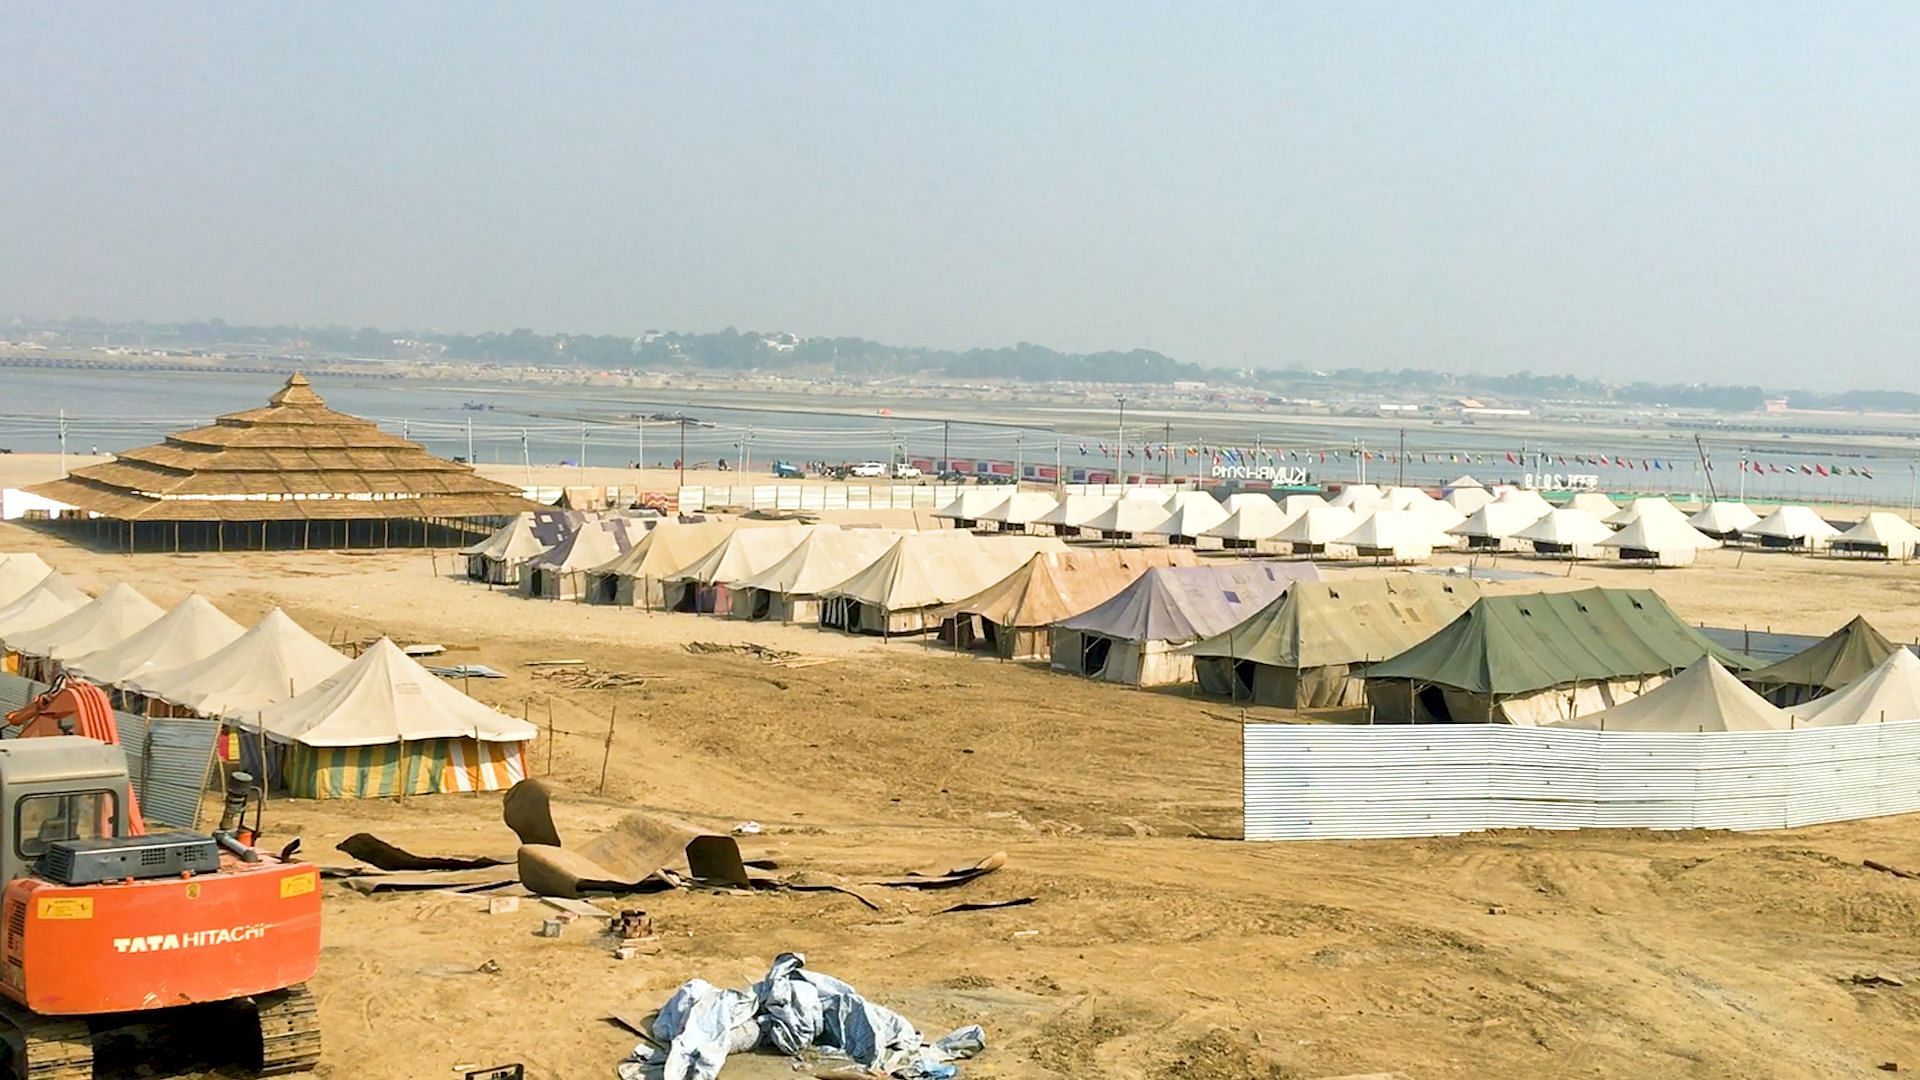 Rent for one night at Kumbh mela ranges from Rs 600 to Rs 32,000